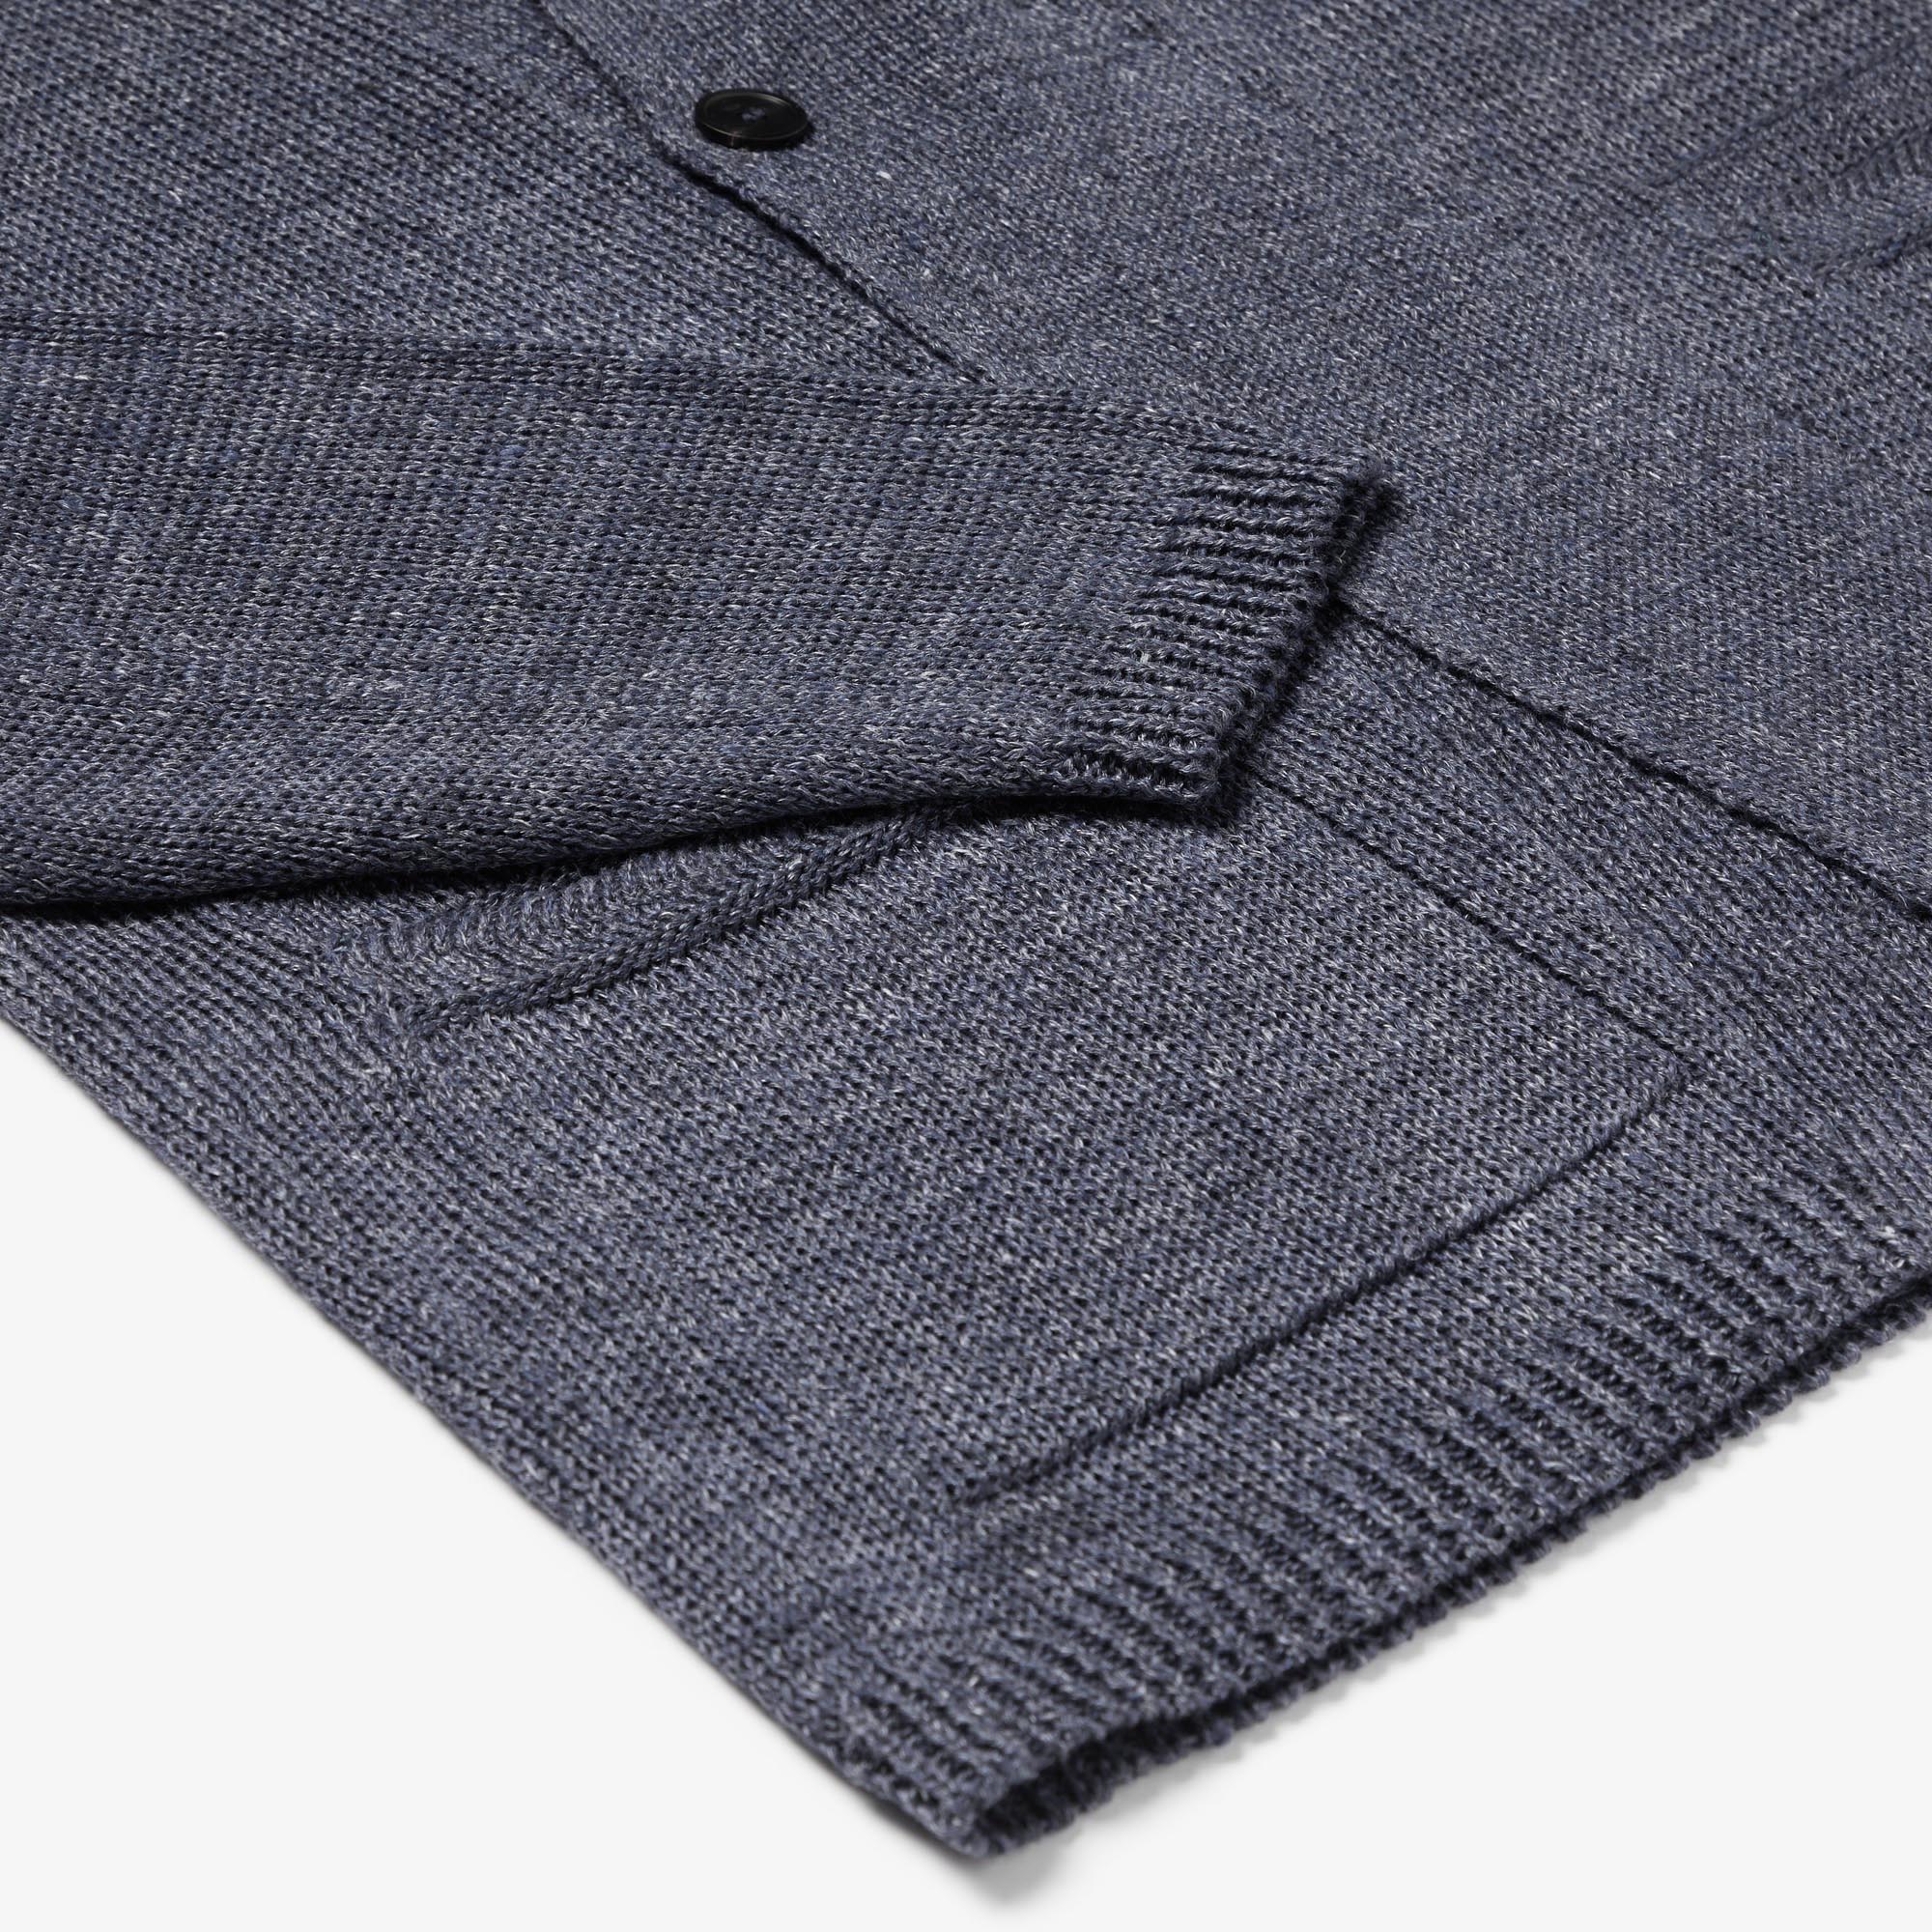 Relaxed Jacket in Navy Marl — Inis Meáin Knitwear